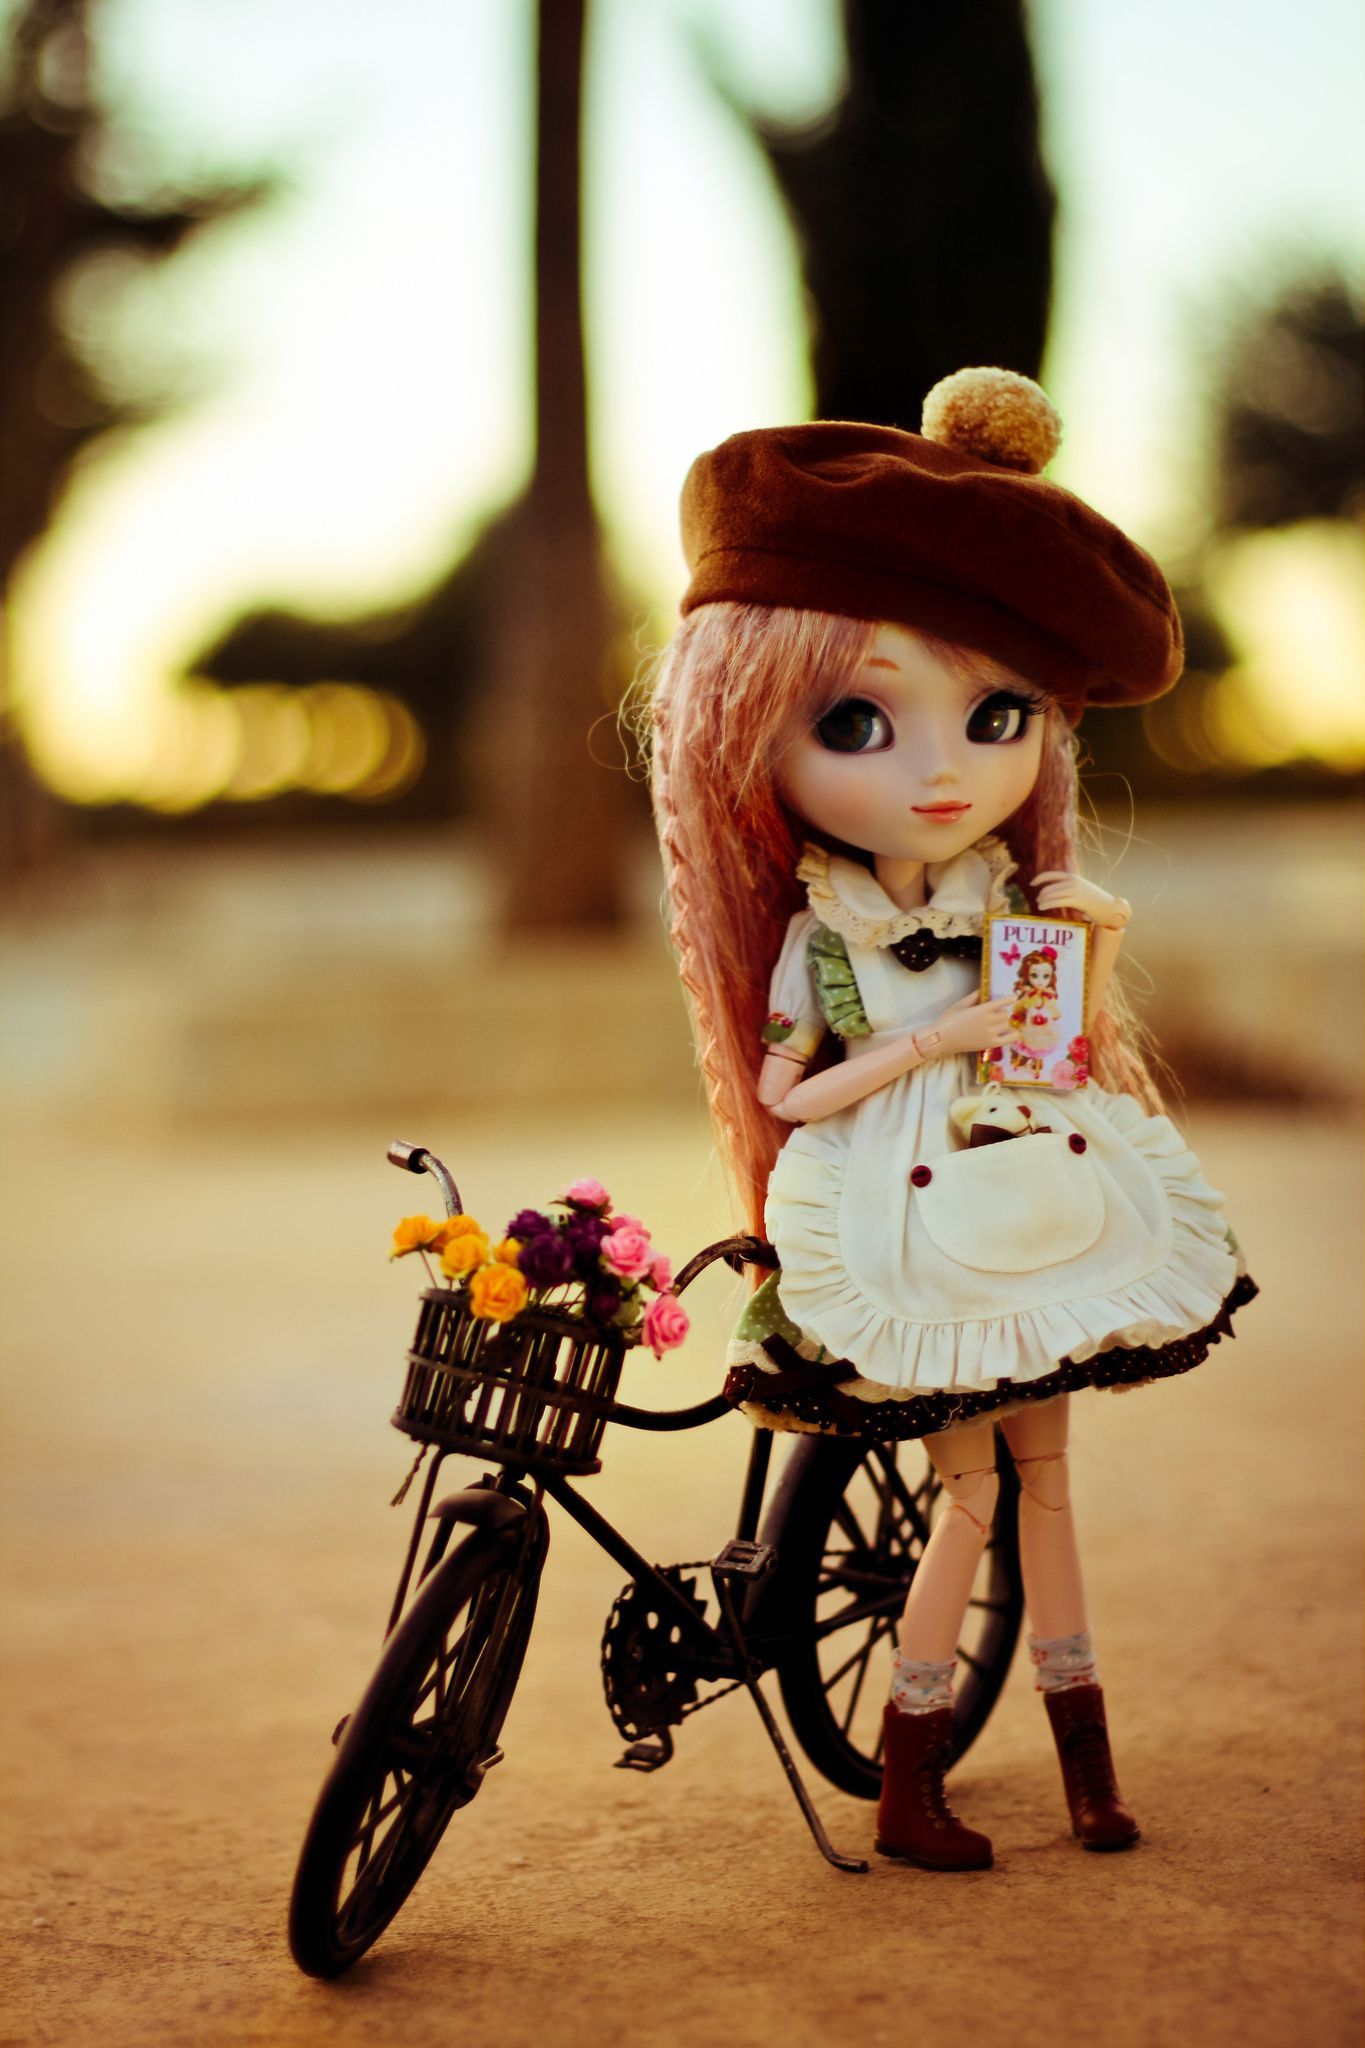 I love the model of her. Her pose inspires me to get a doll bike for my Pullip and family. Cute cartoon wallpaper, Cute baby dolls, Baby girl drawing